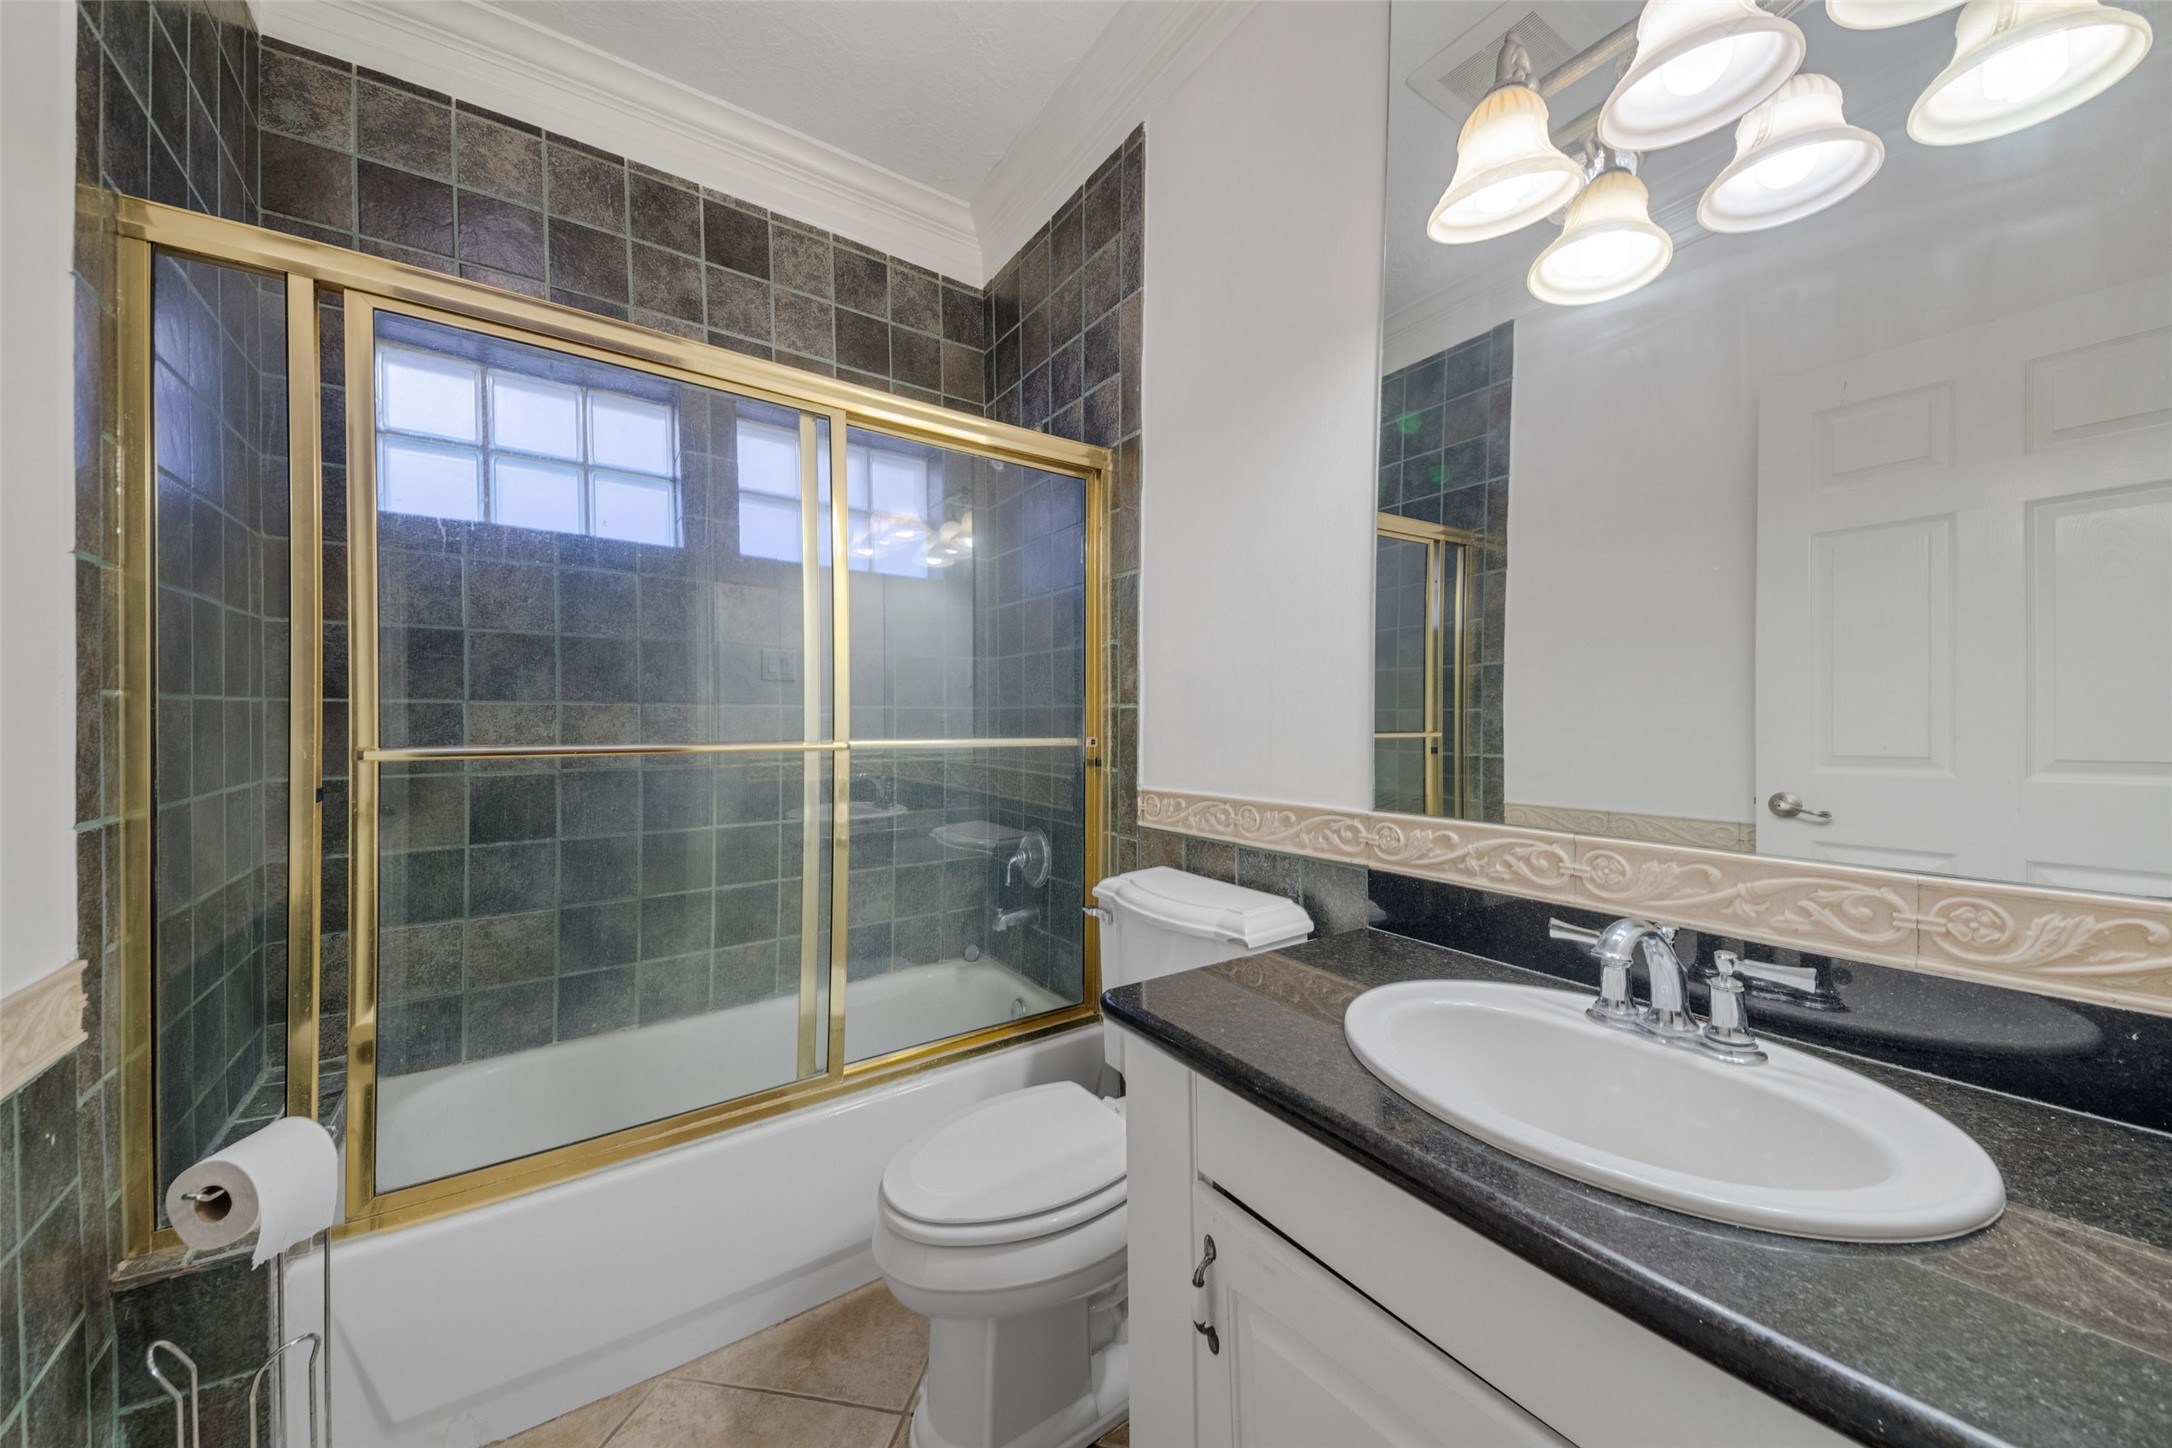 The classicly designed upstairs bathroom showcases a glass door shower-tub and granite counter tops.